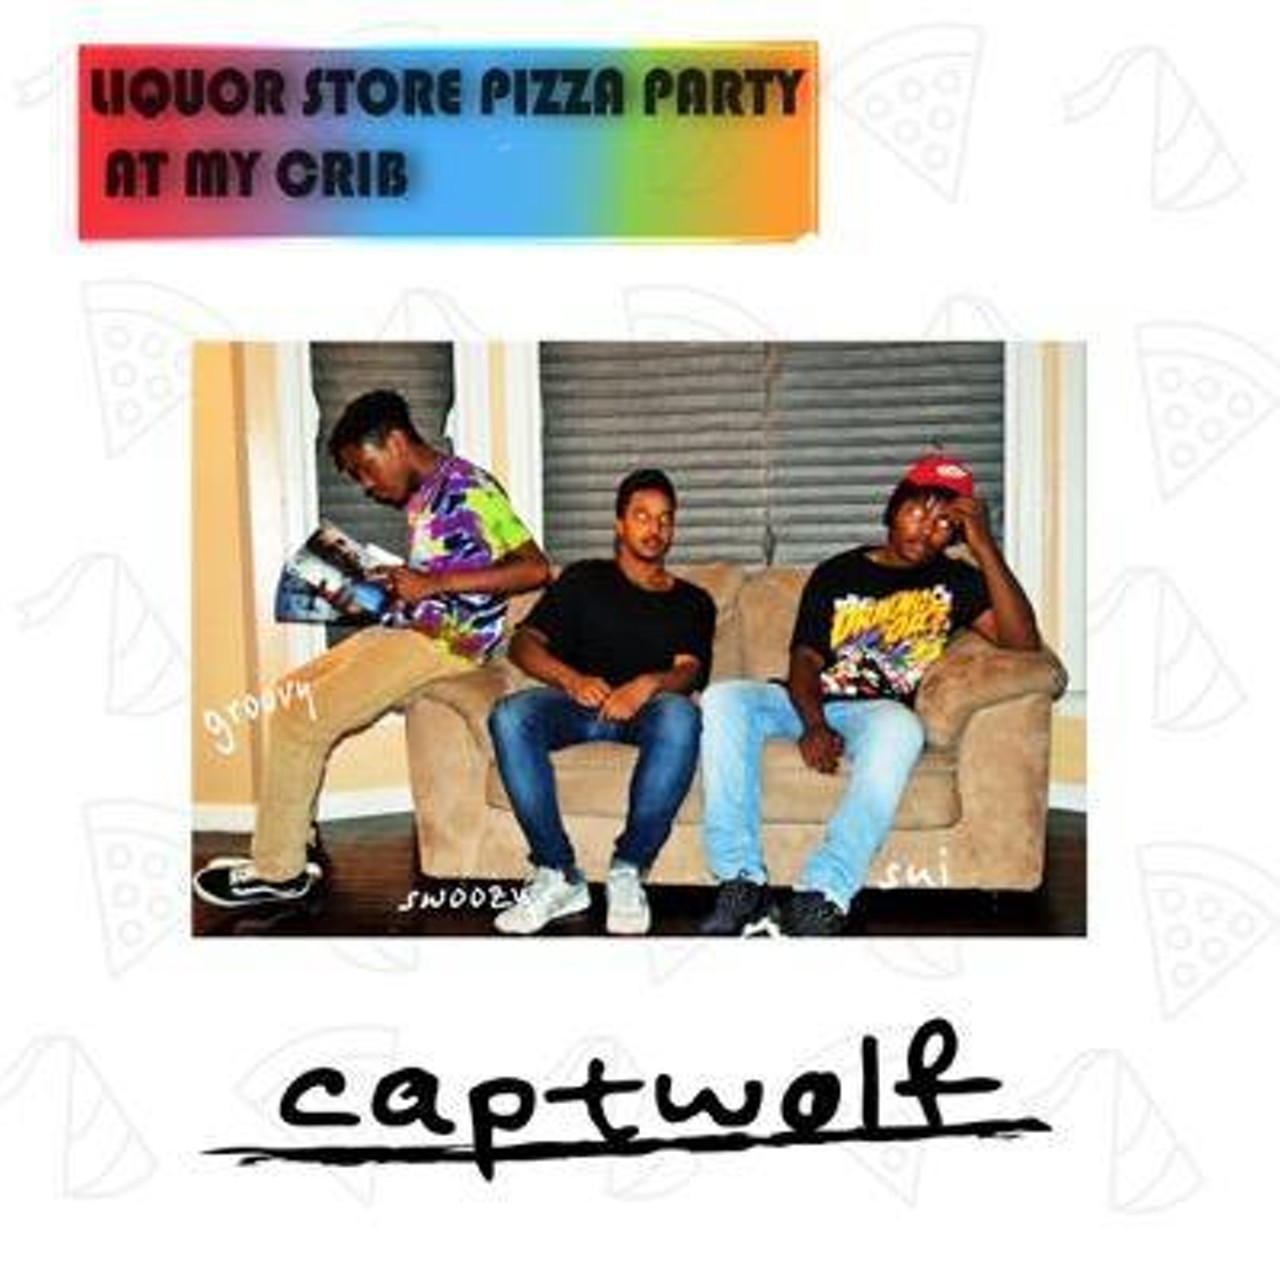 CAPTWOLF: These hip hop genre mashers are truly unique to Detroit. Catch their performance @ Third Man Records in Cass Corridor on June 23rd.